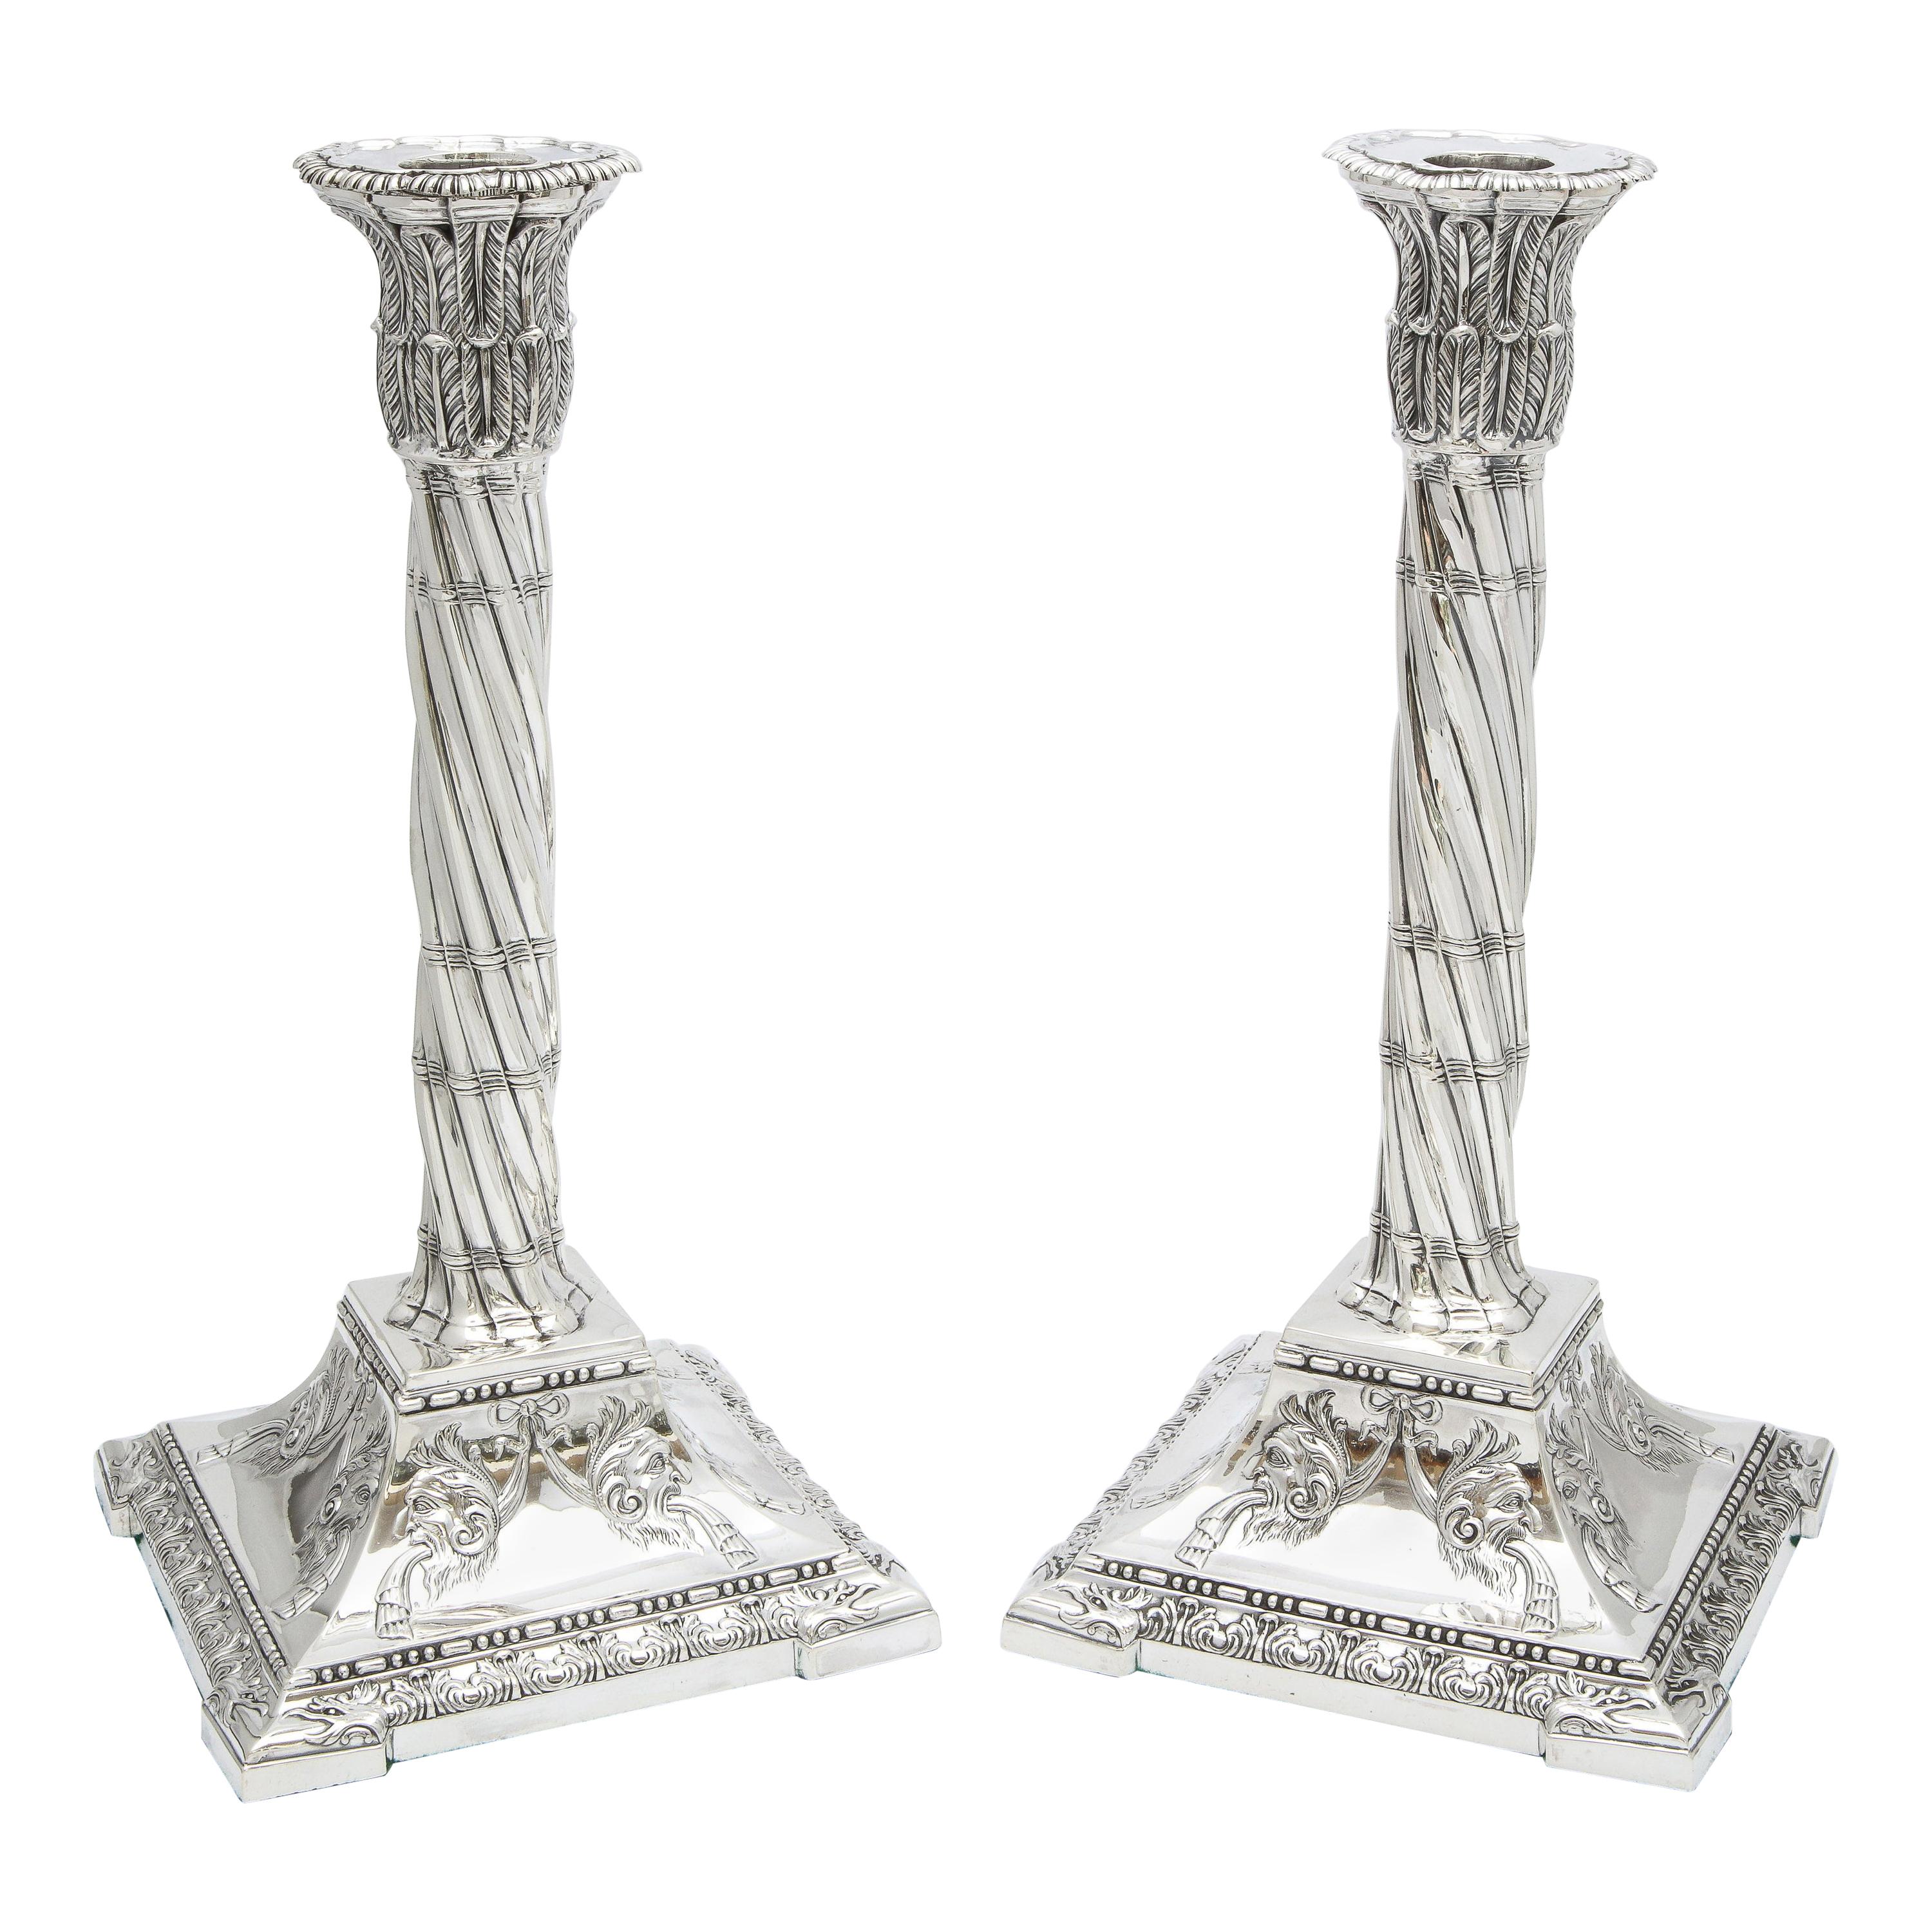 Large Pair of Neoclassical Sterling Silver Column-Form Candlesticks